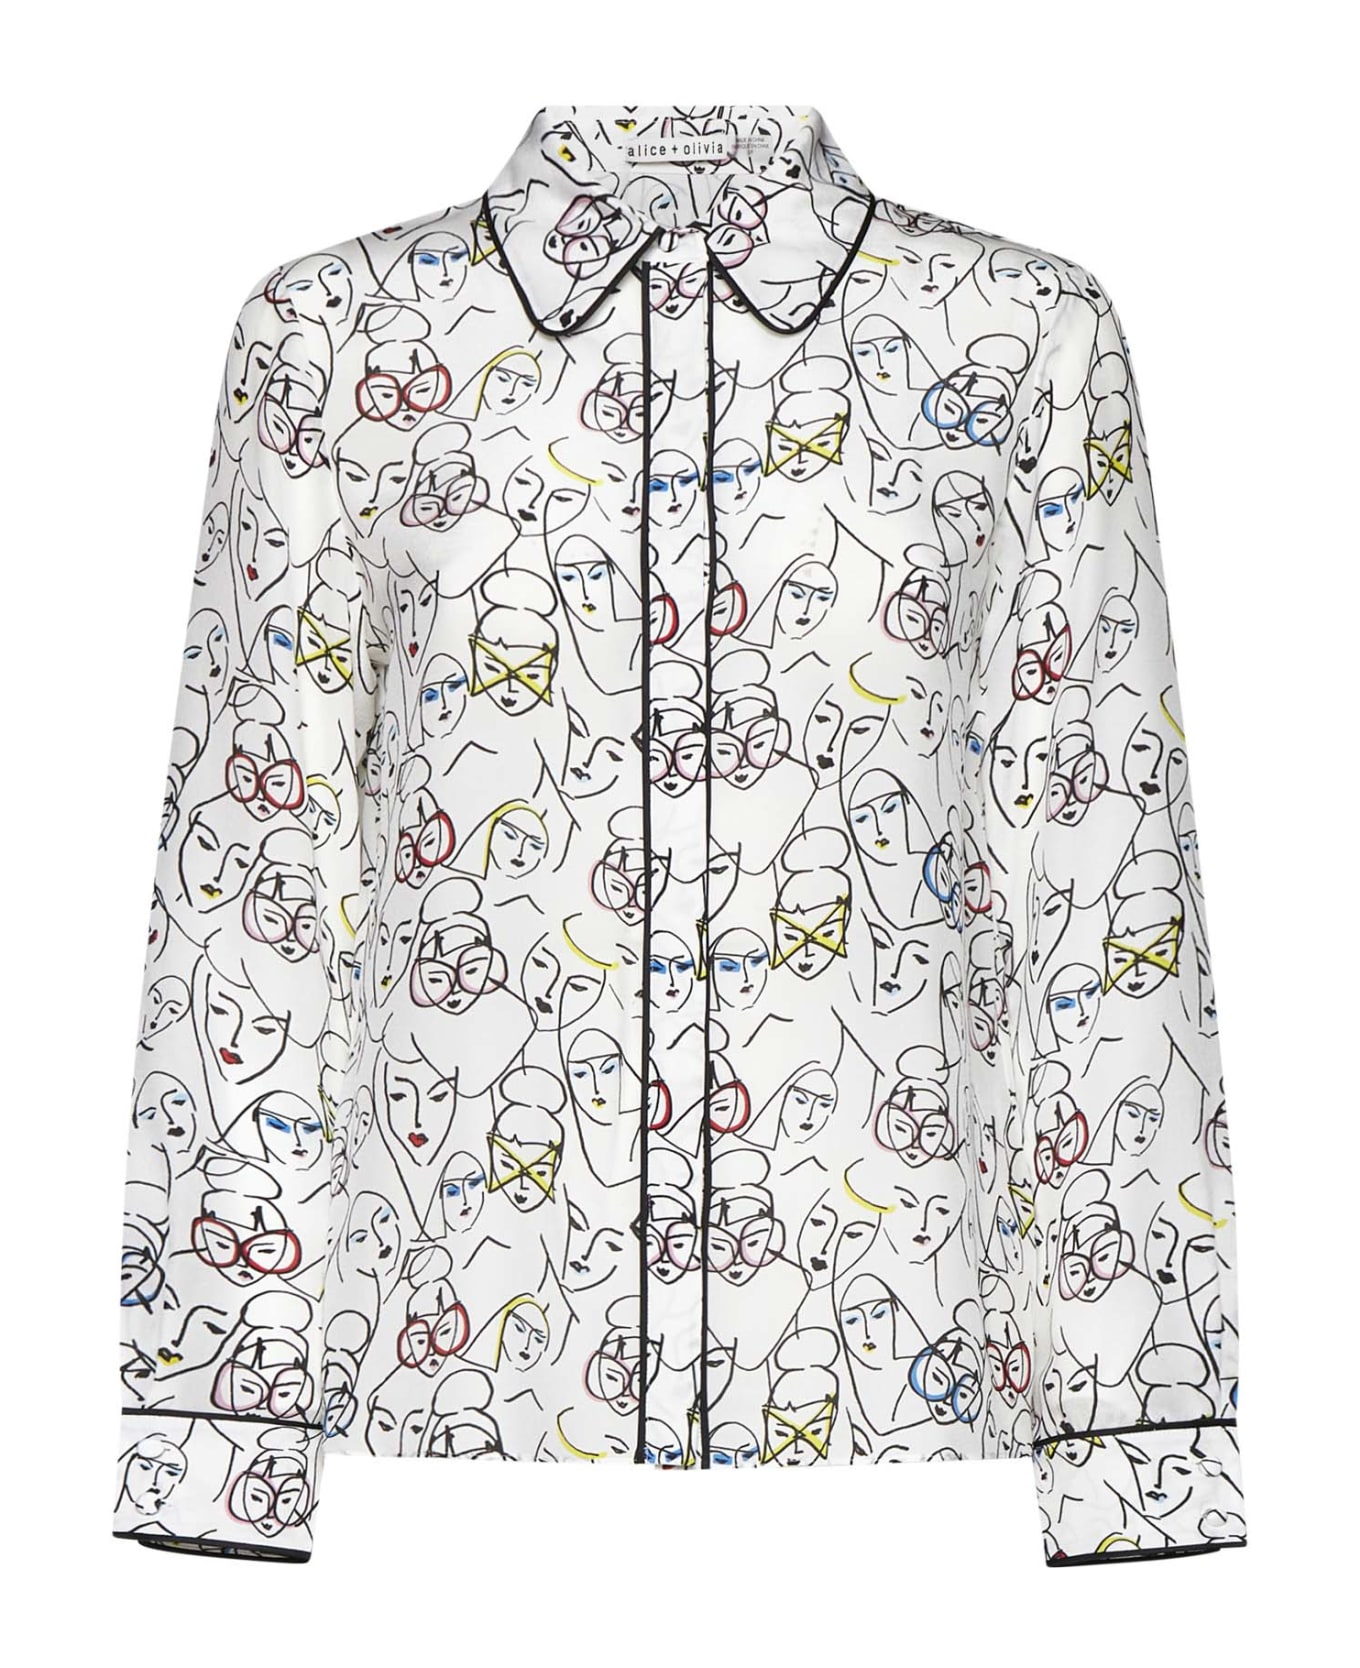 Alice + Olivia Shirt - Bisous stace